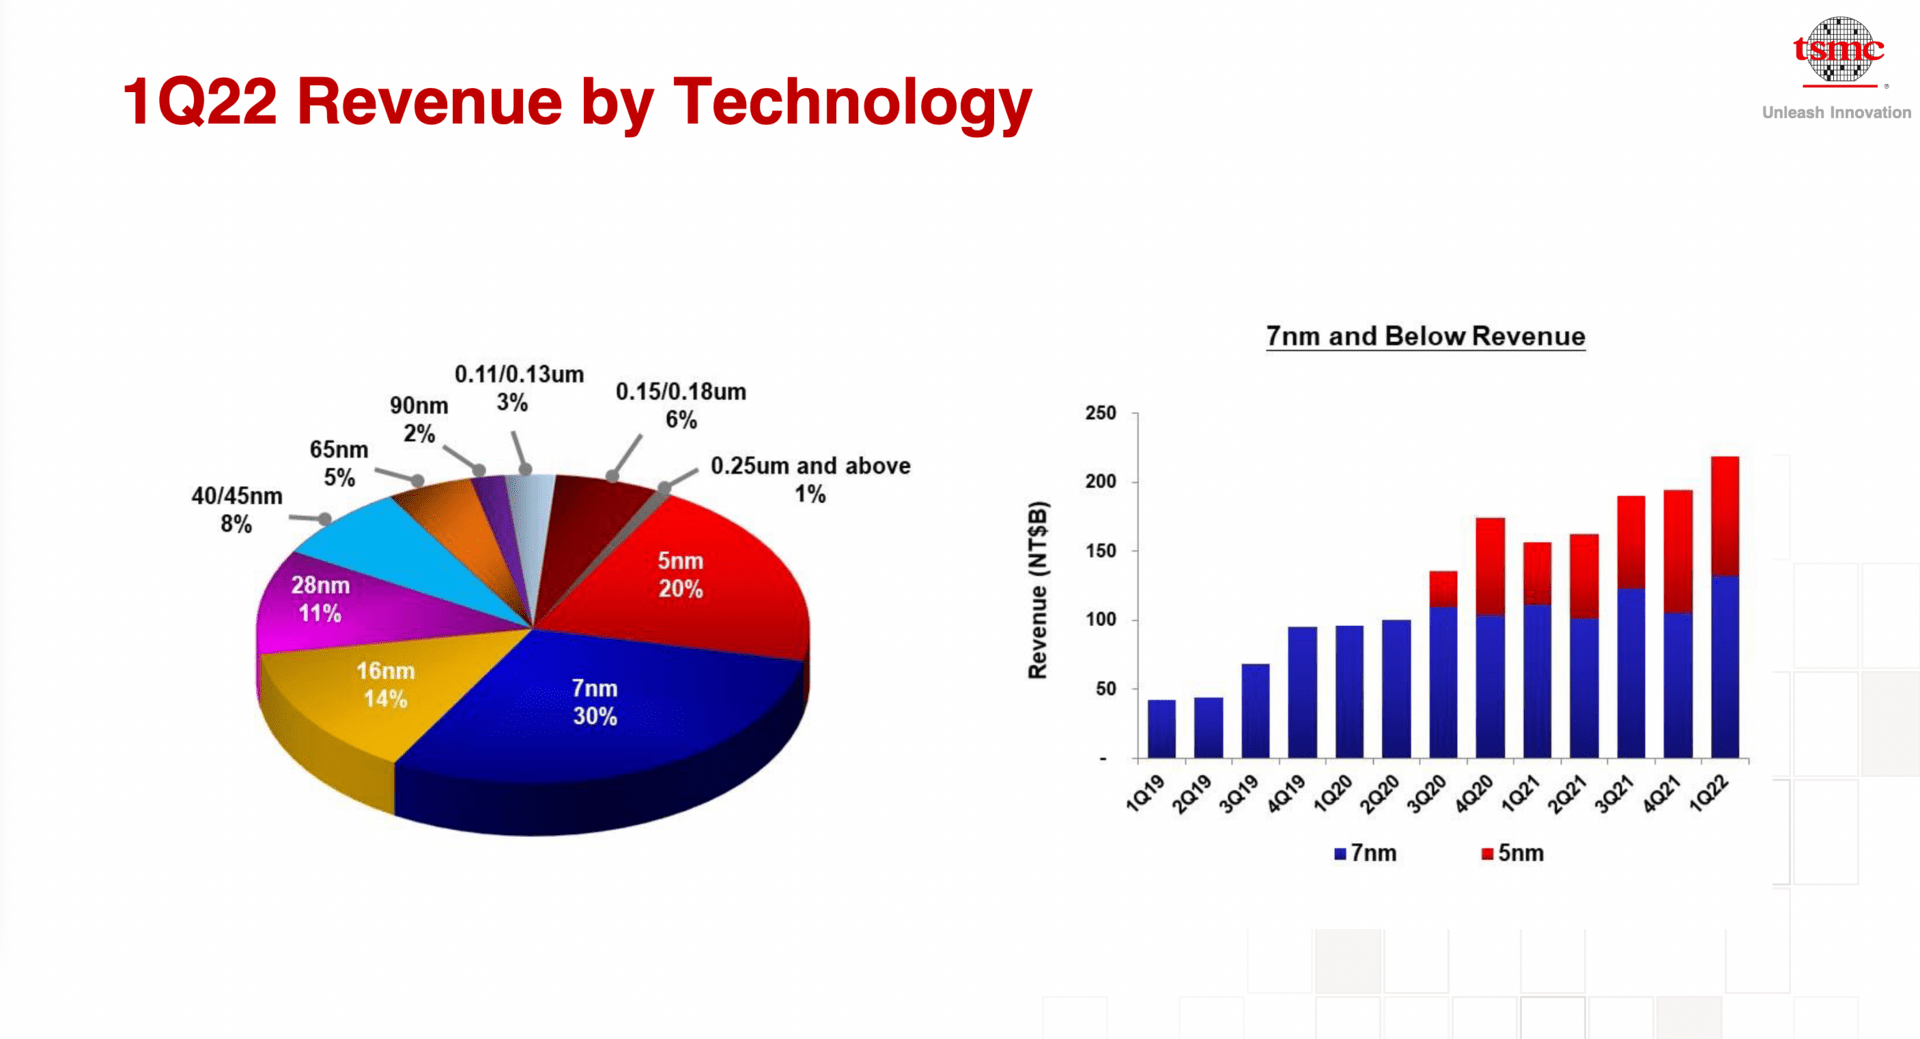 Revenue by technology level